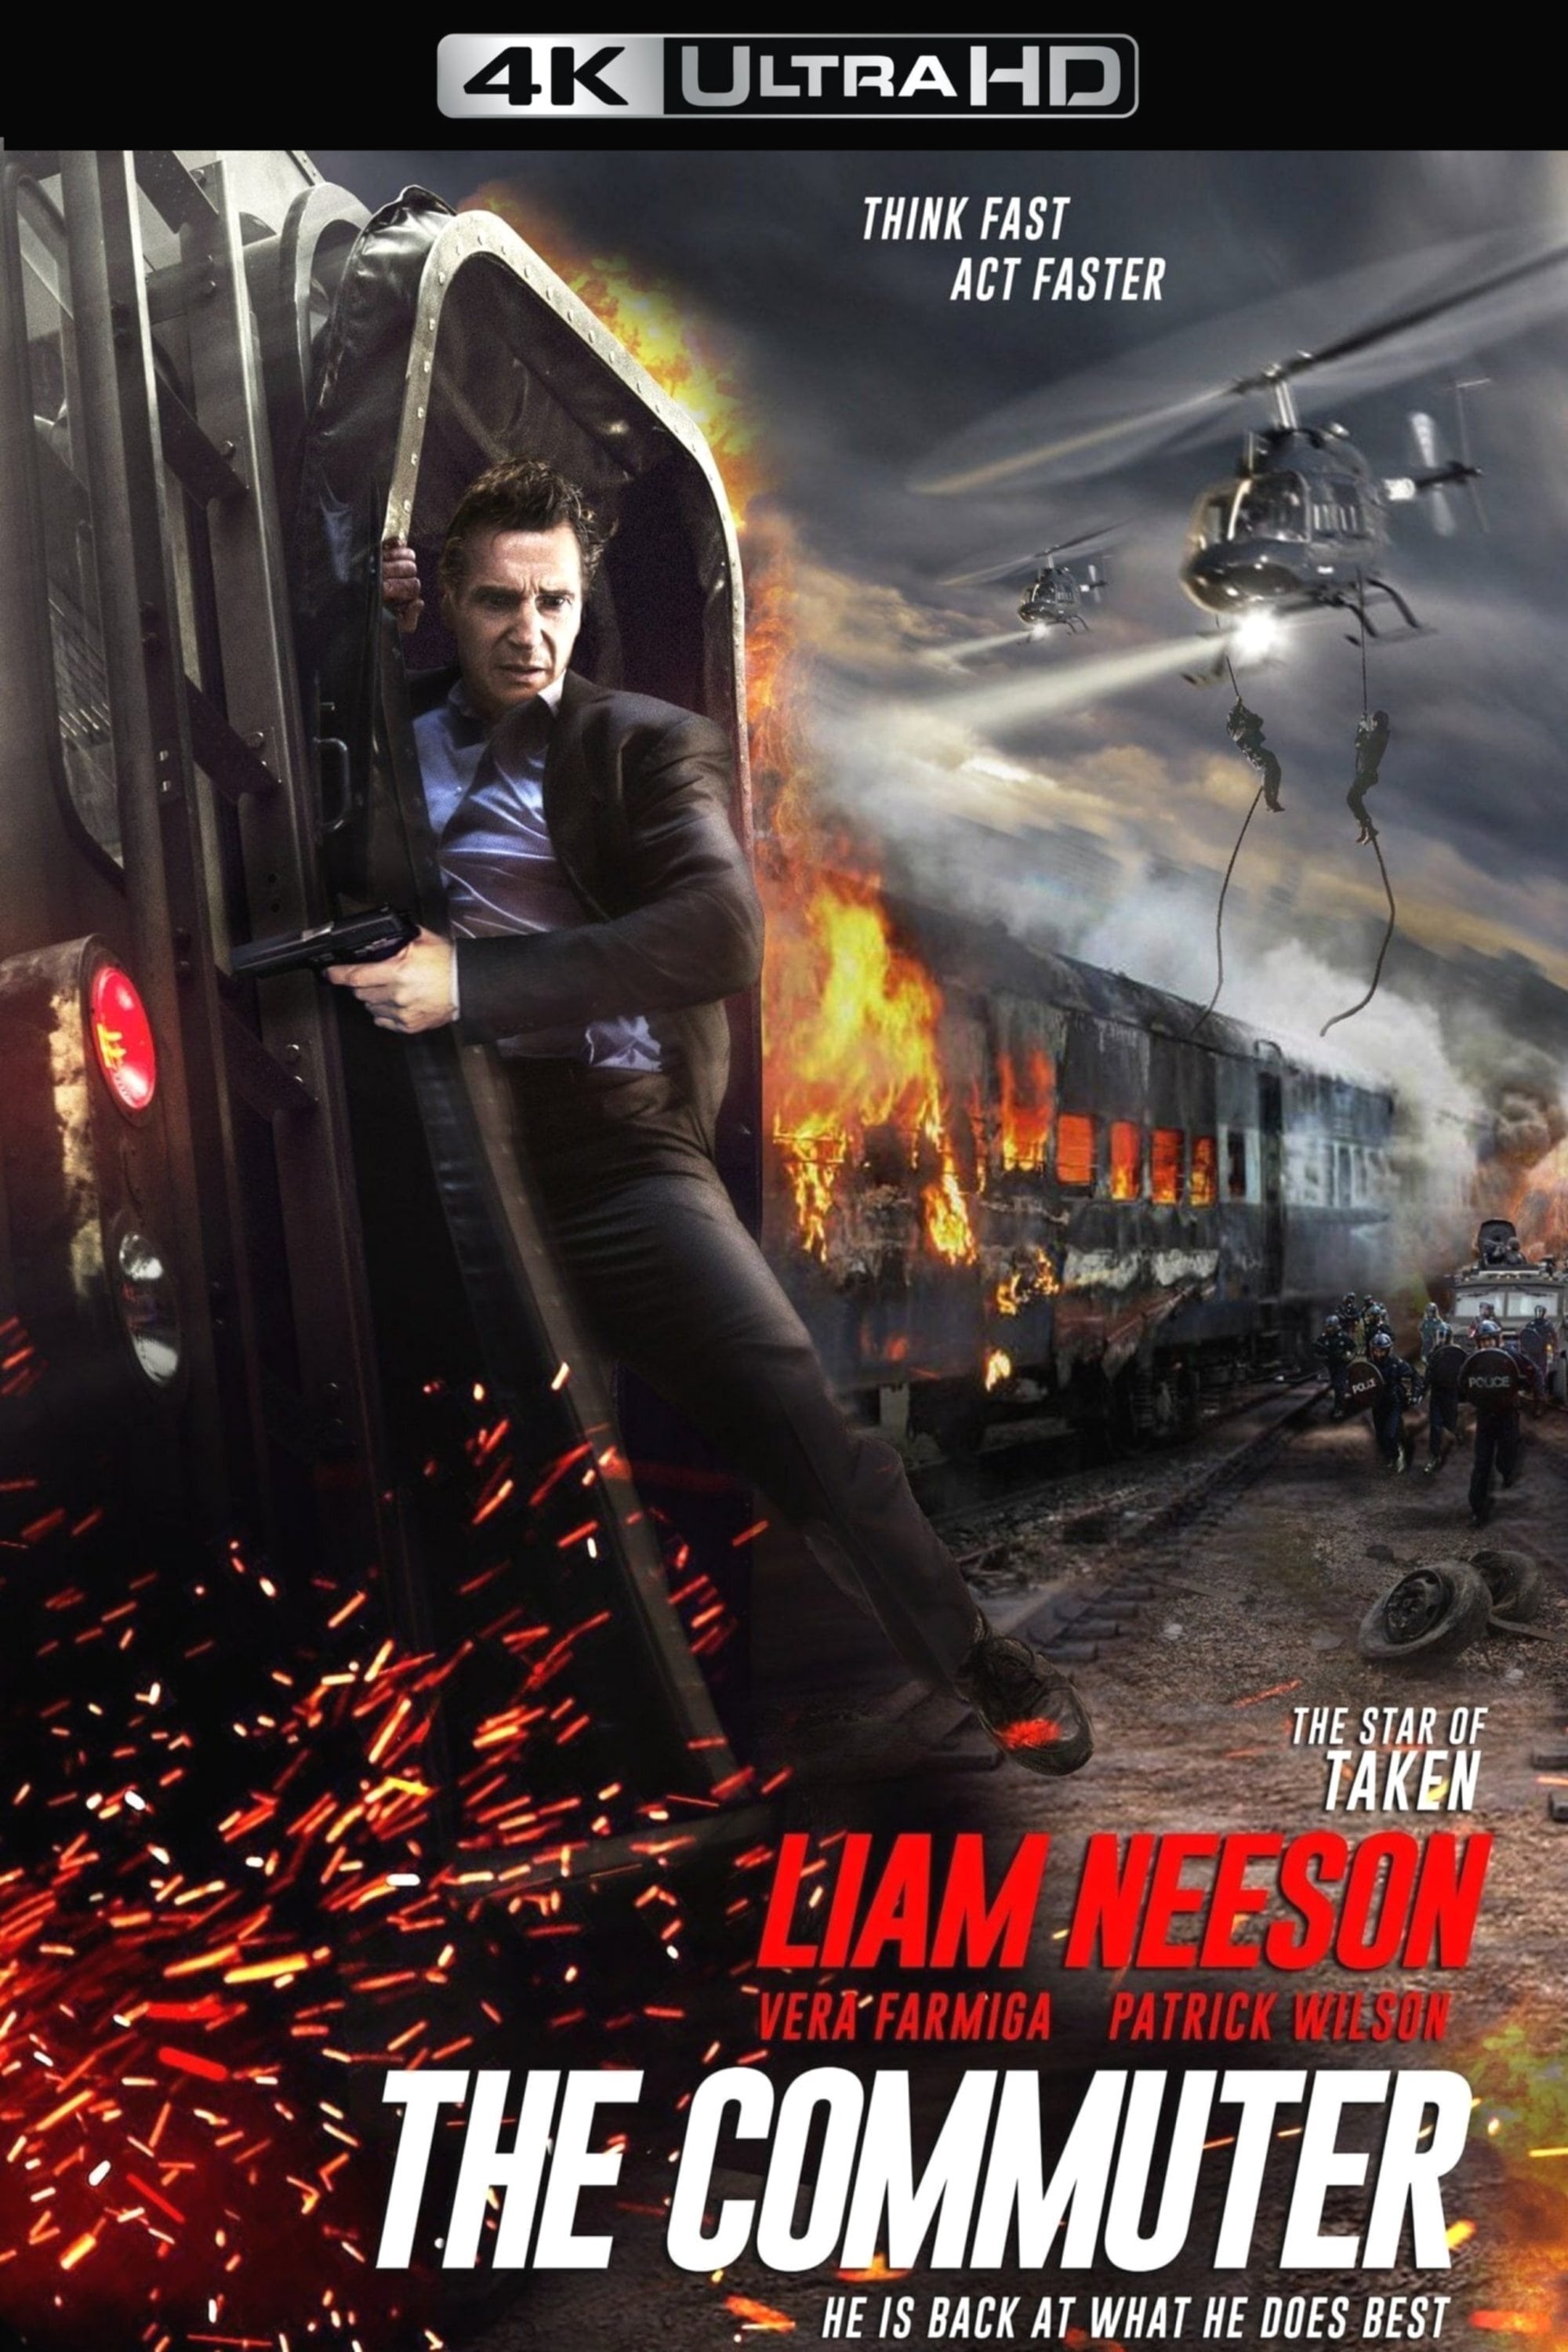 The Commuter POSTER